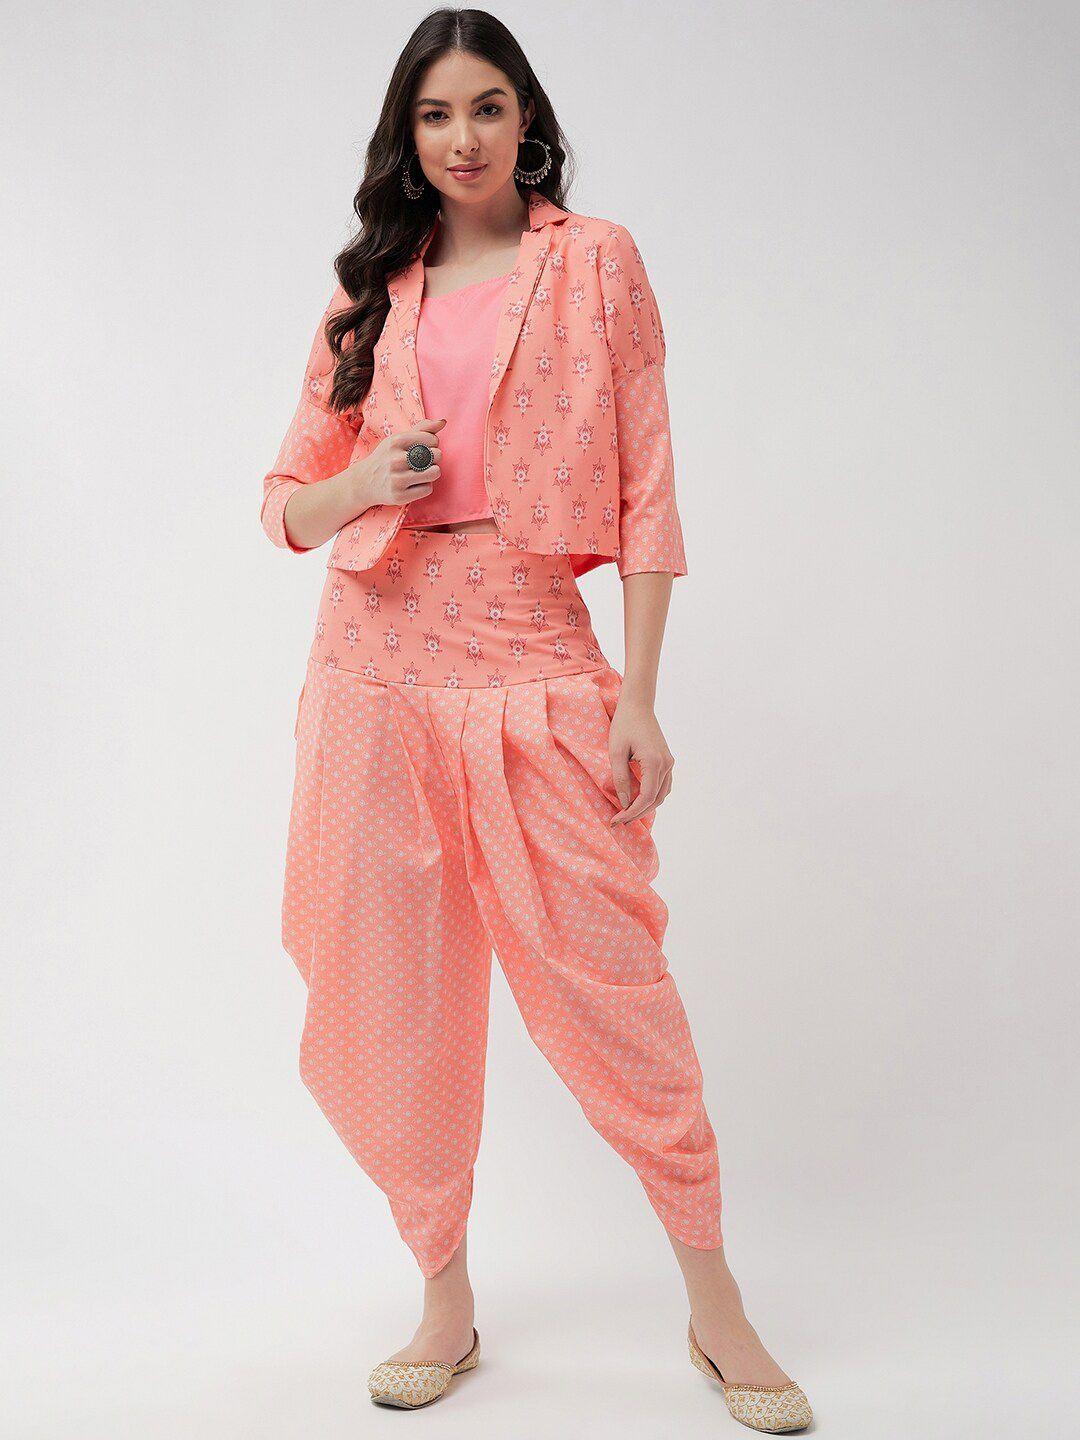 pannkh printed leg 'o' mutton sleeves jacket with top & dhoti pant co-ords